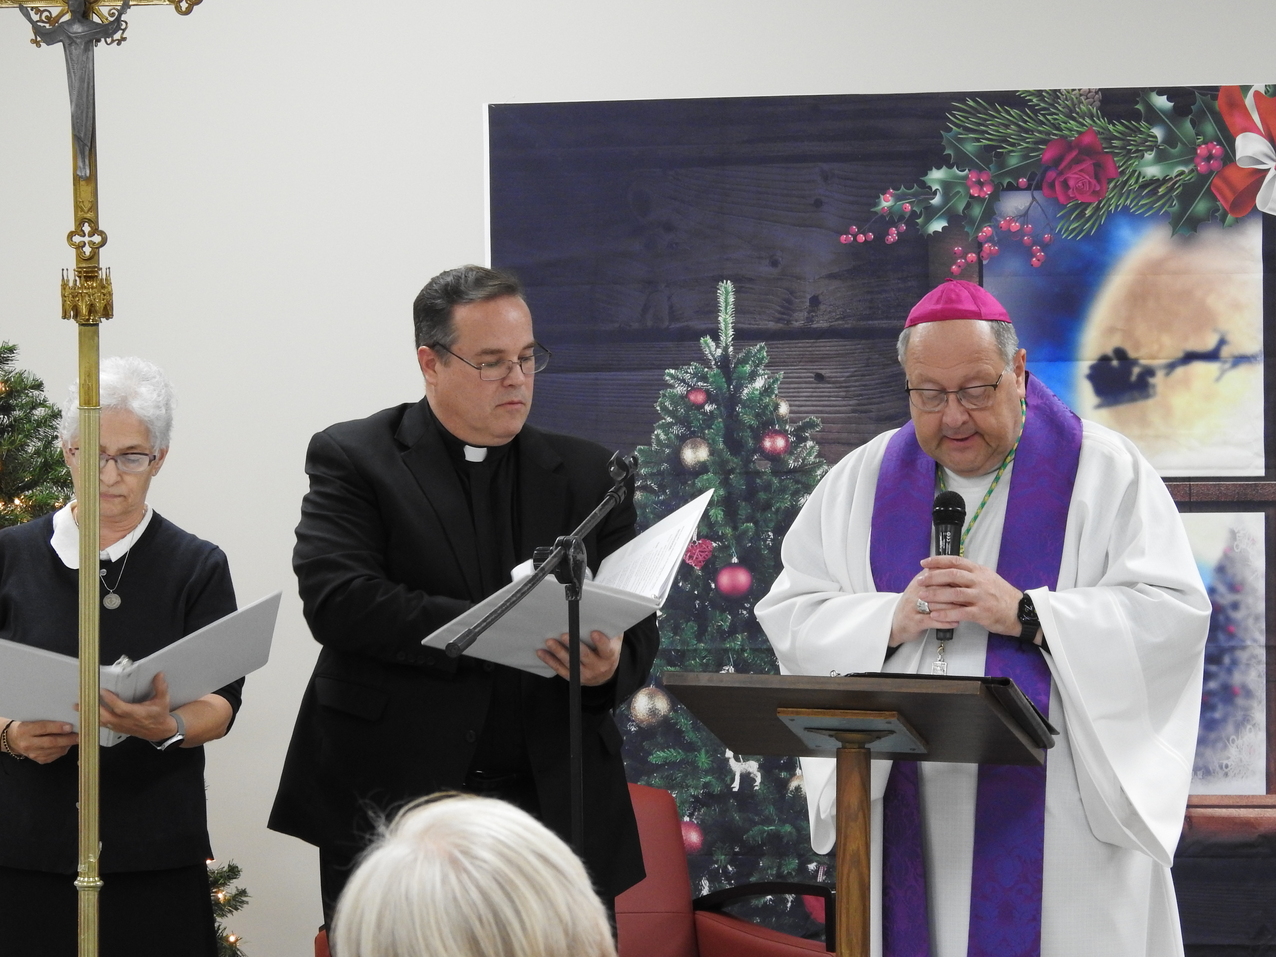  Newly renovated St. Michael the Archangel Parish Hall is blessed by Bishop Malesic